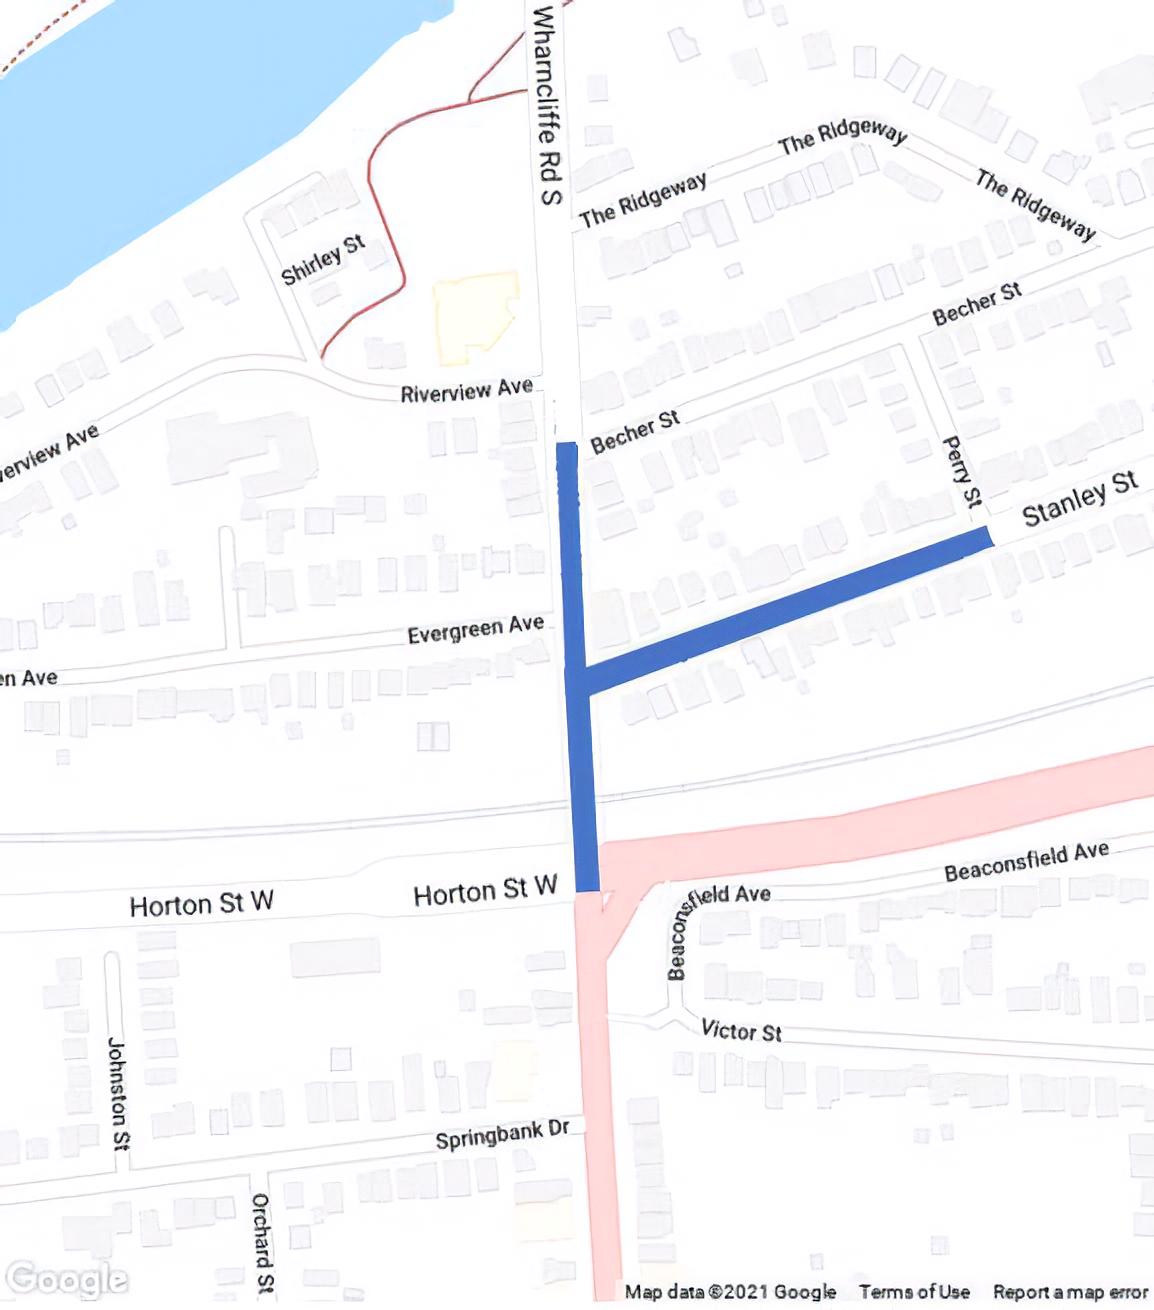 The Wharncliffe Road and Stanley Street lane restrictions. For more information, please contact Jiten Patel at jpatel@london.ca 